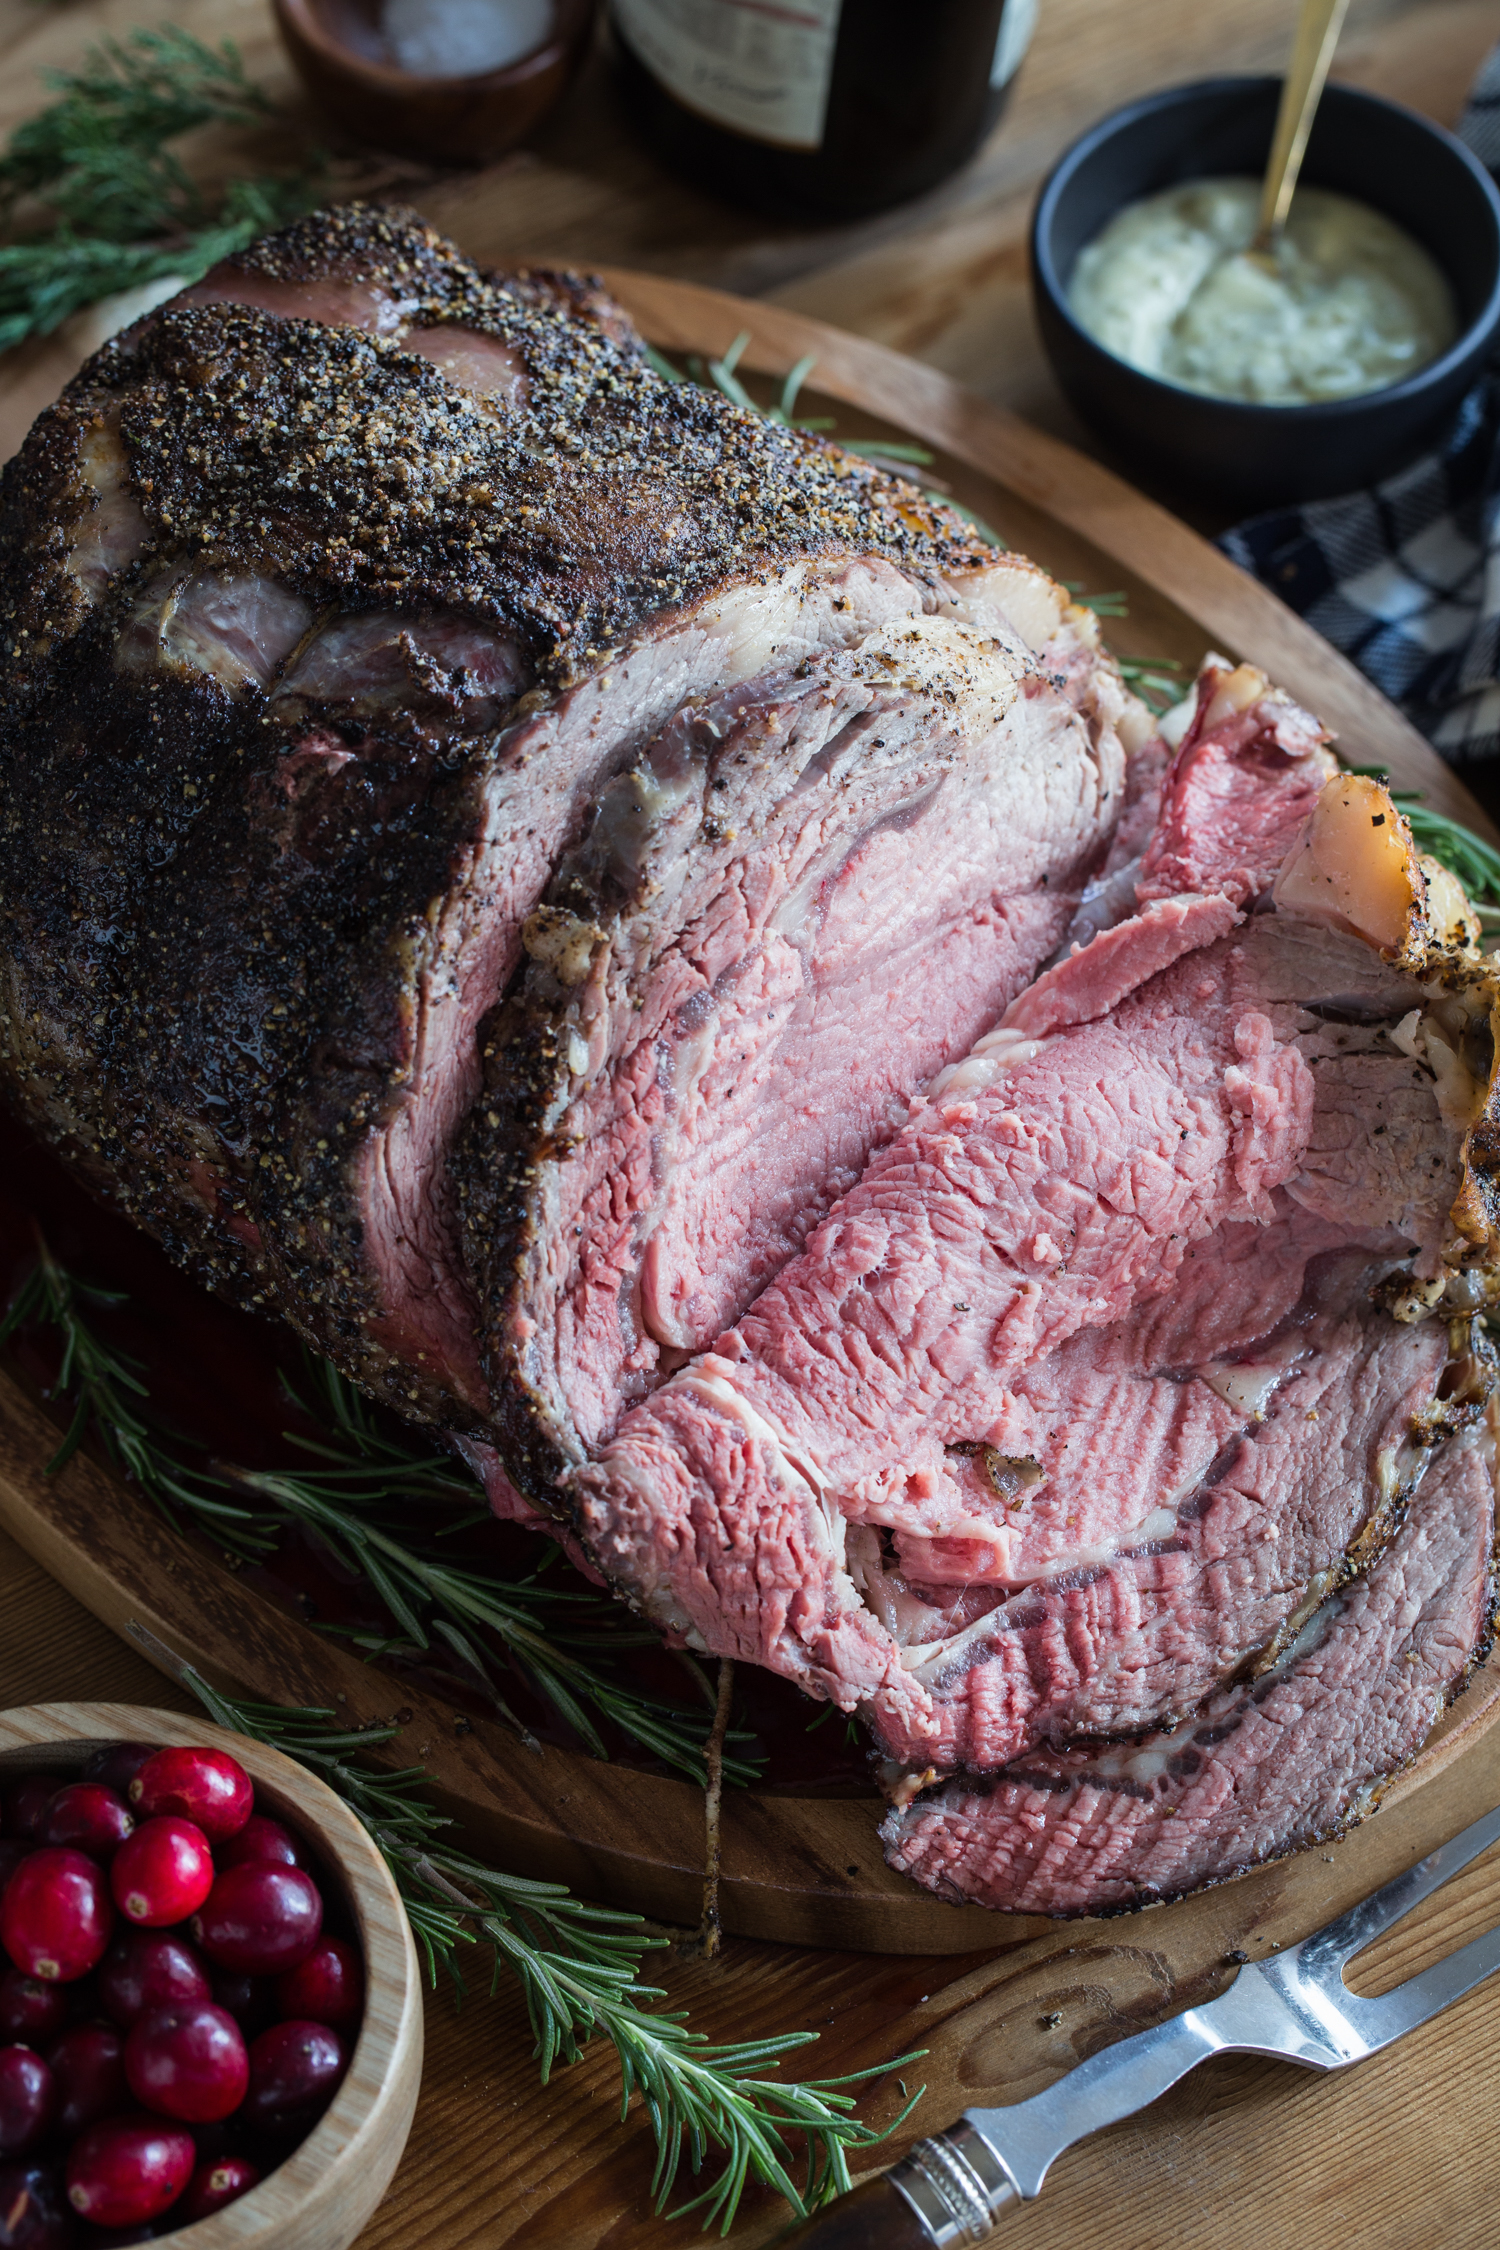 Perfect Pepper and Herb Crusted Prime Rib